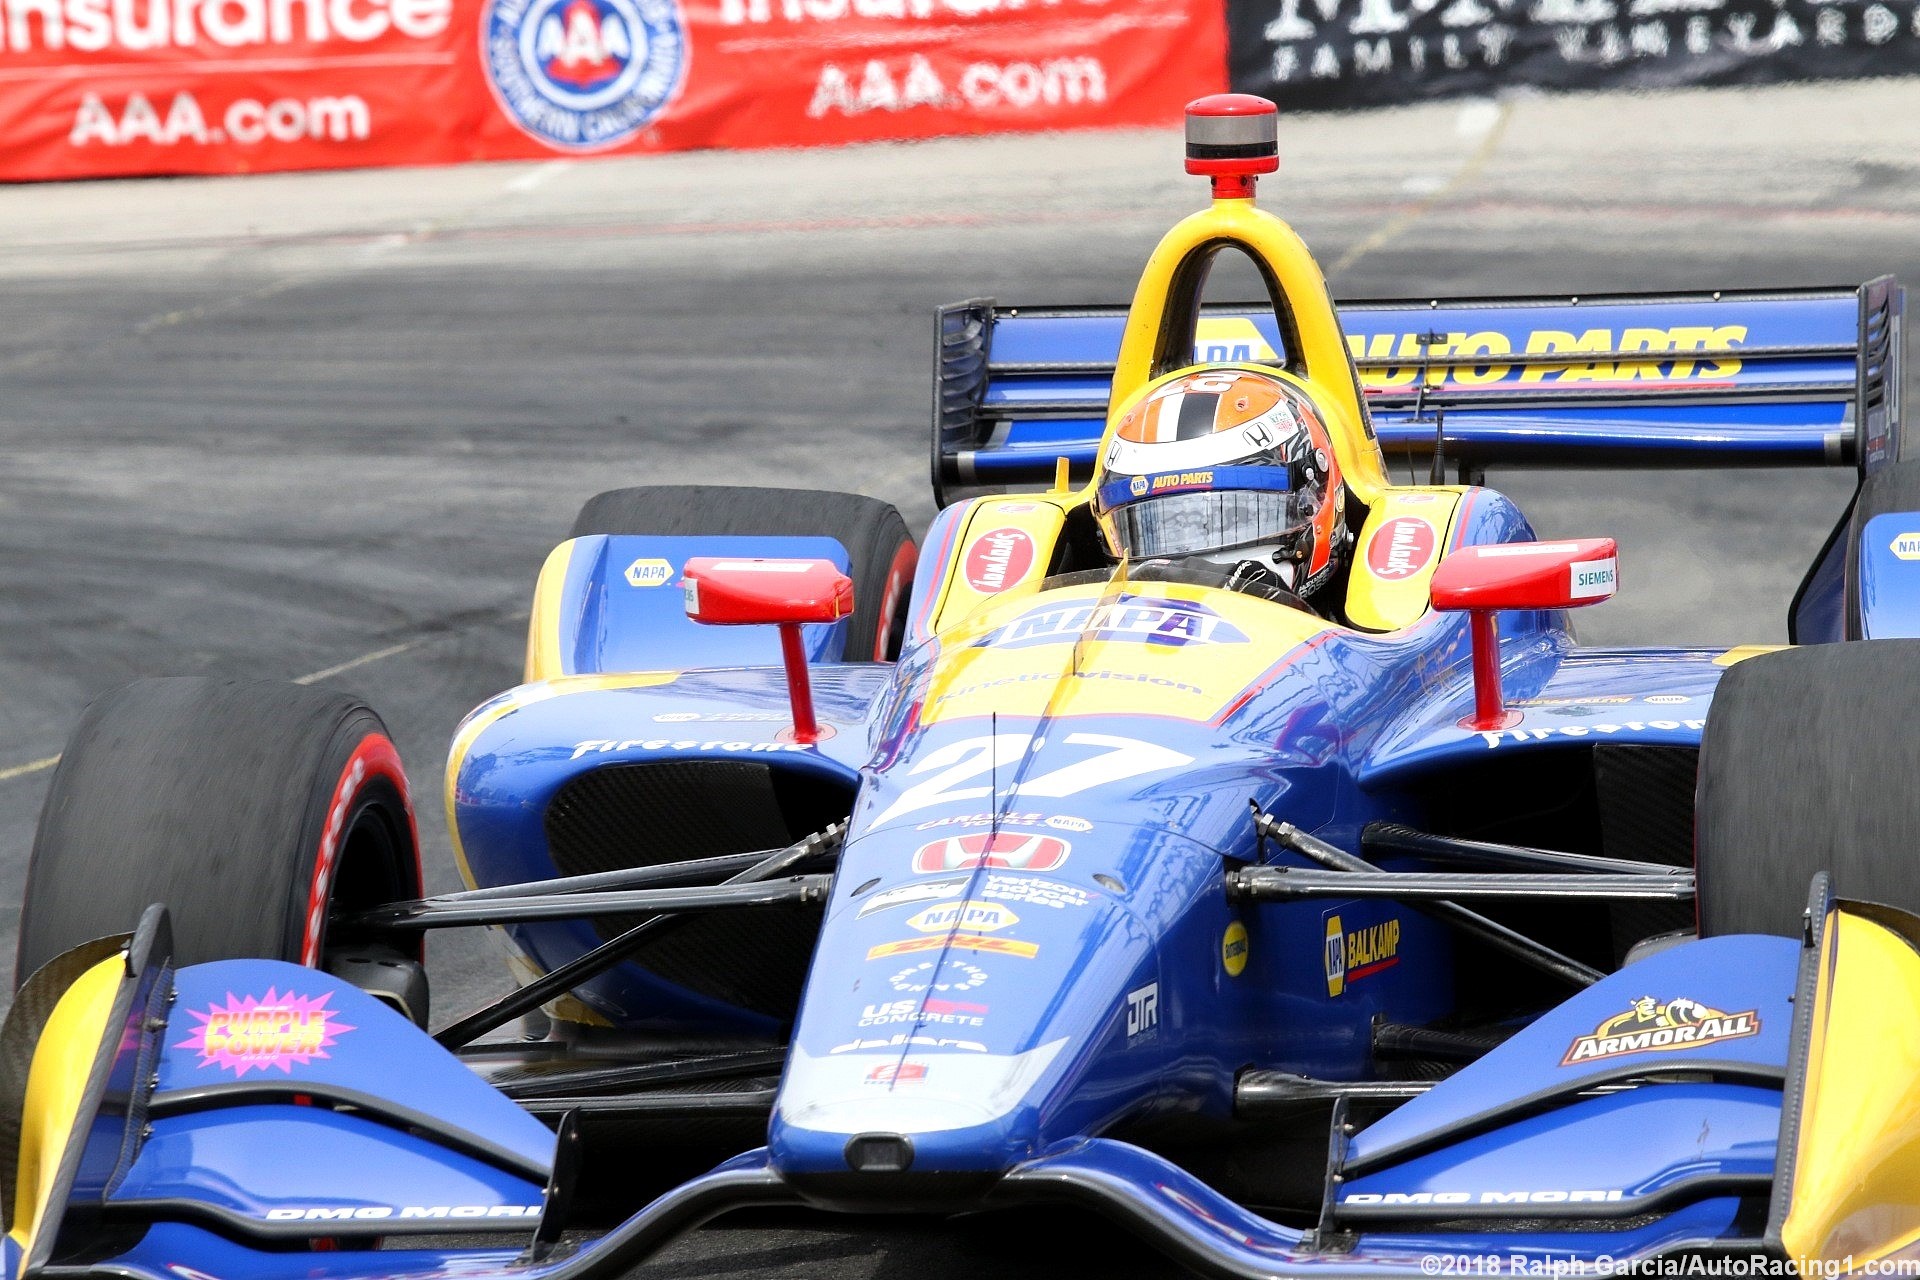 IndyCar would become popular with any sports fan into betting